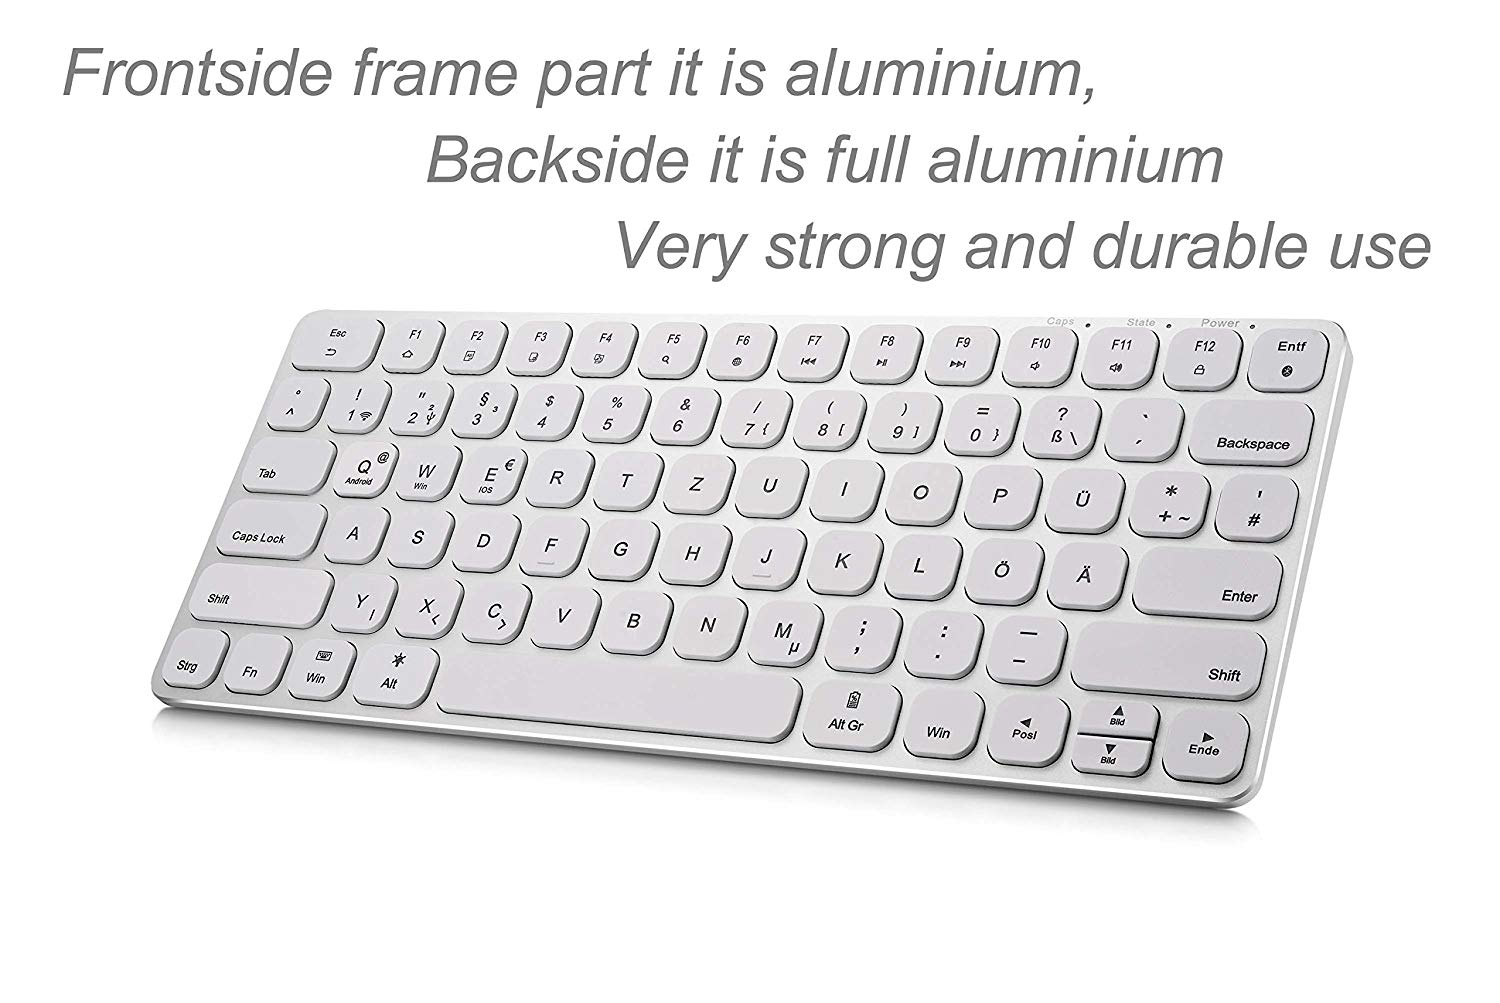 SUPREMERY Full Aluminum Free Bluetooth Keyboard Wireless or Cable Operation with Backlight